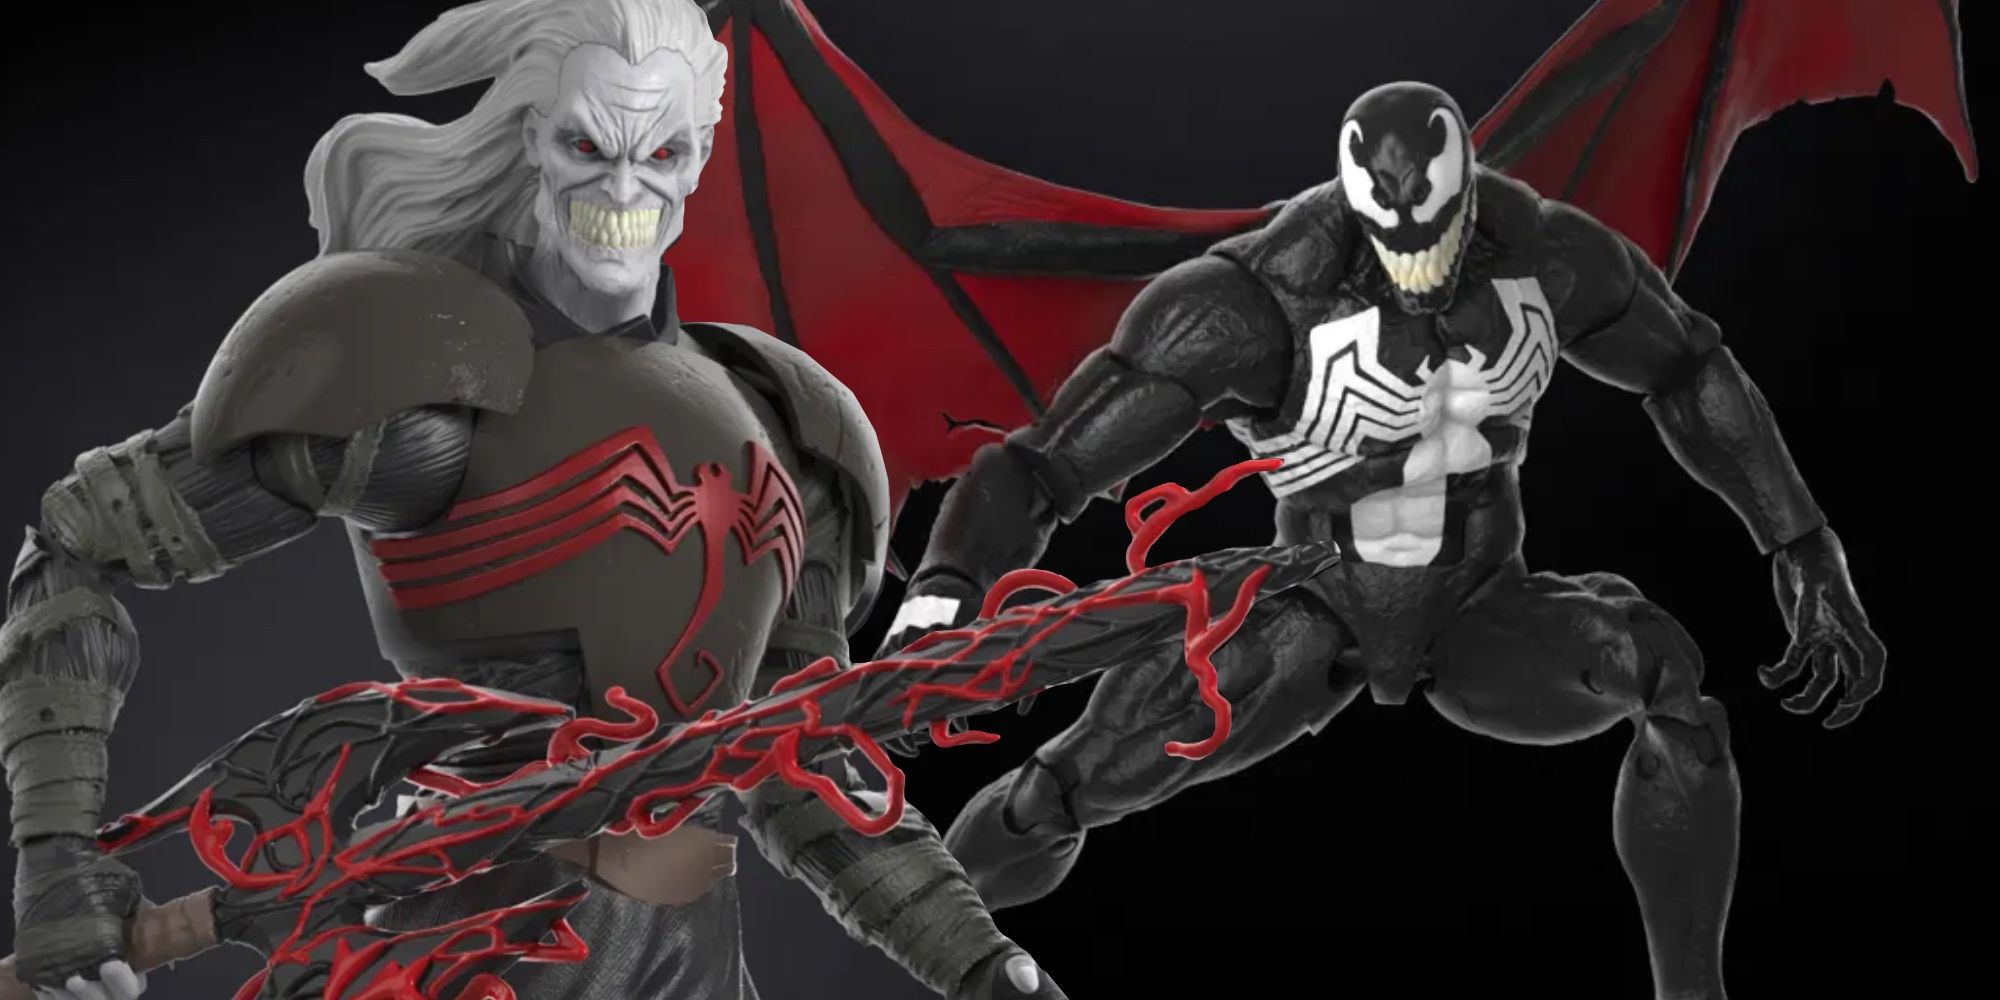 Marvel's King in Black and Venom Get Epic New Legends Figures Featured